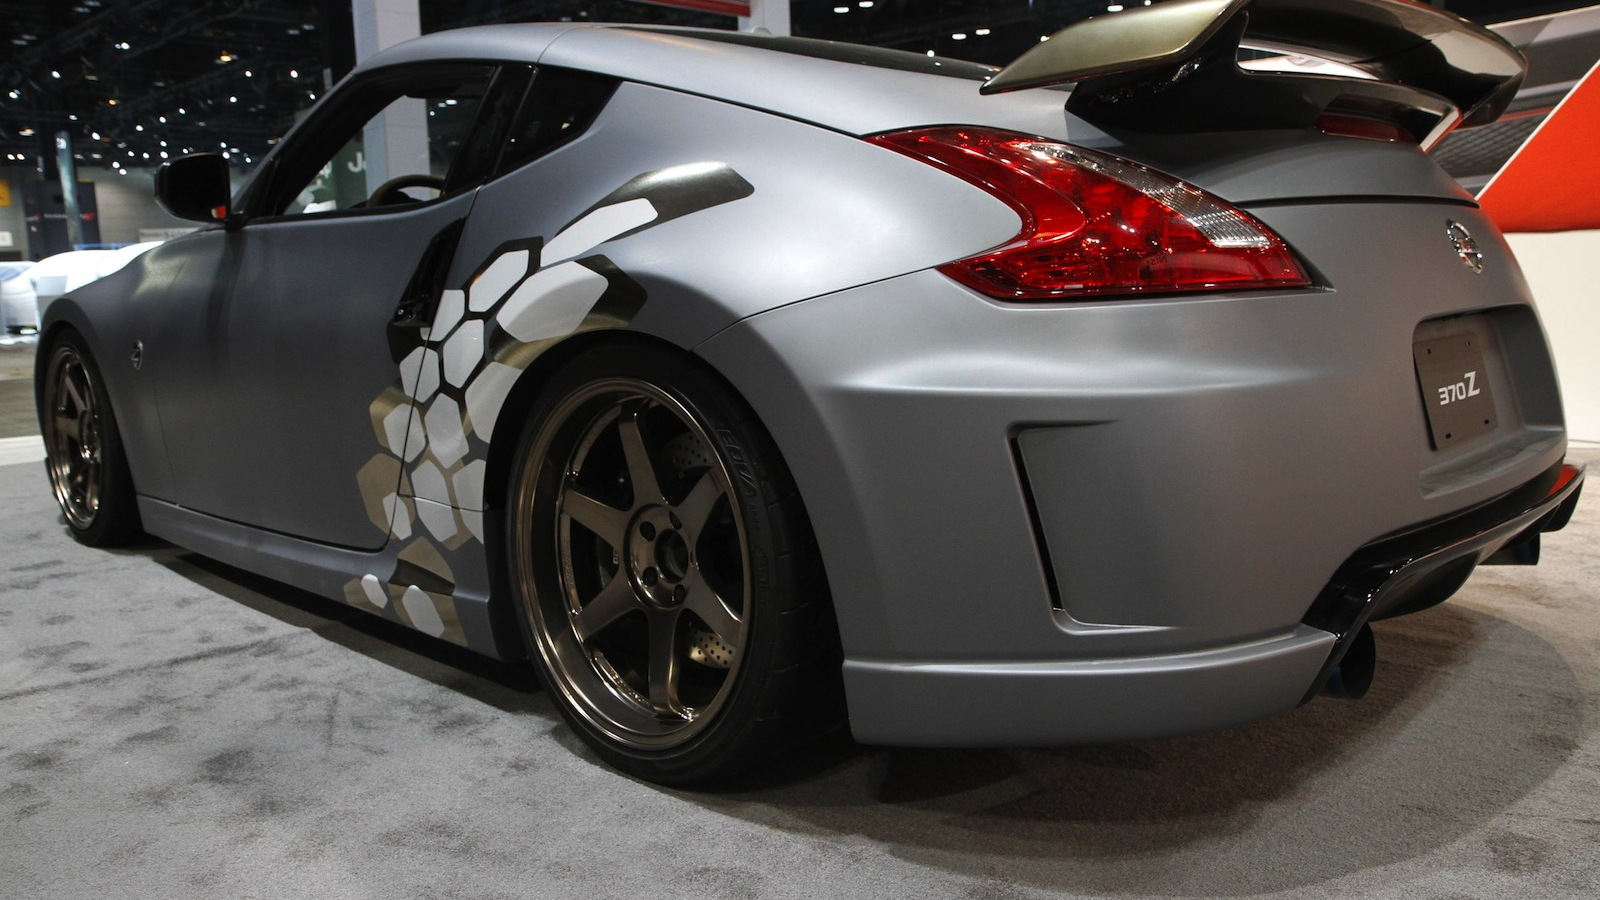 Nissan's Project 370Z - image: Nissan